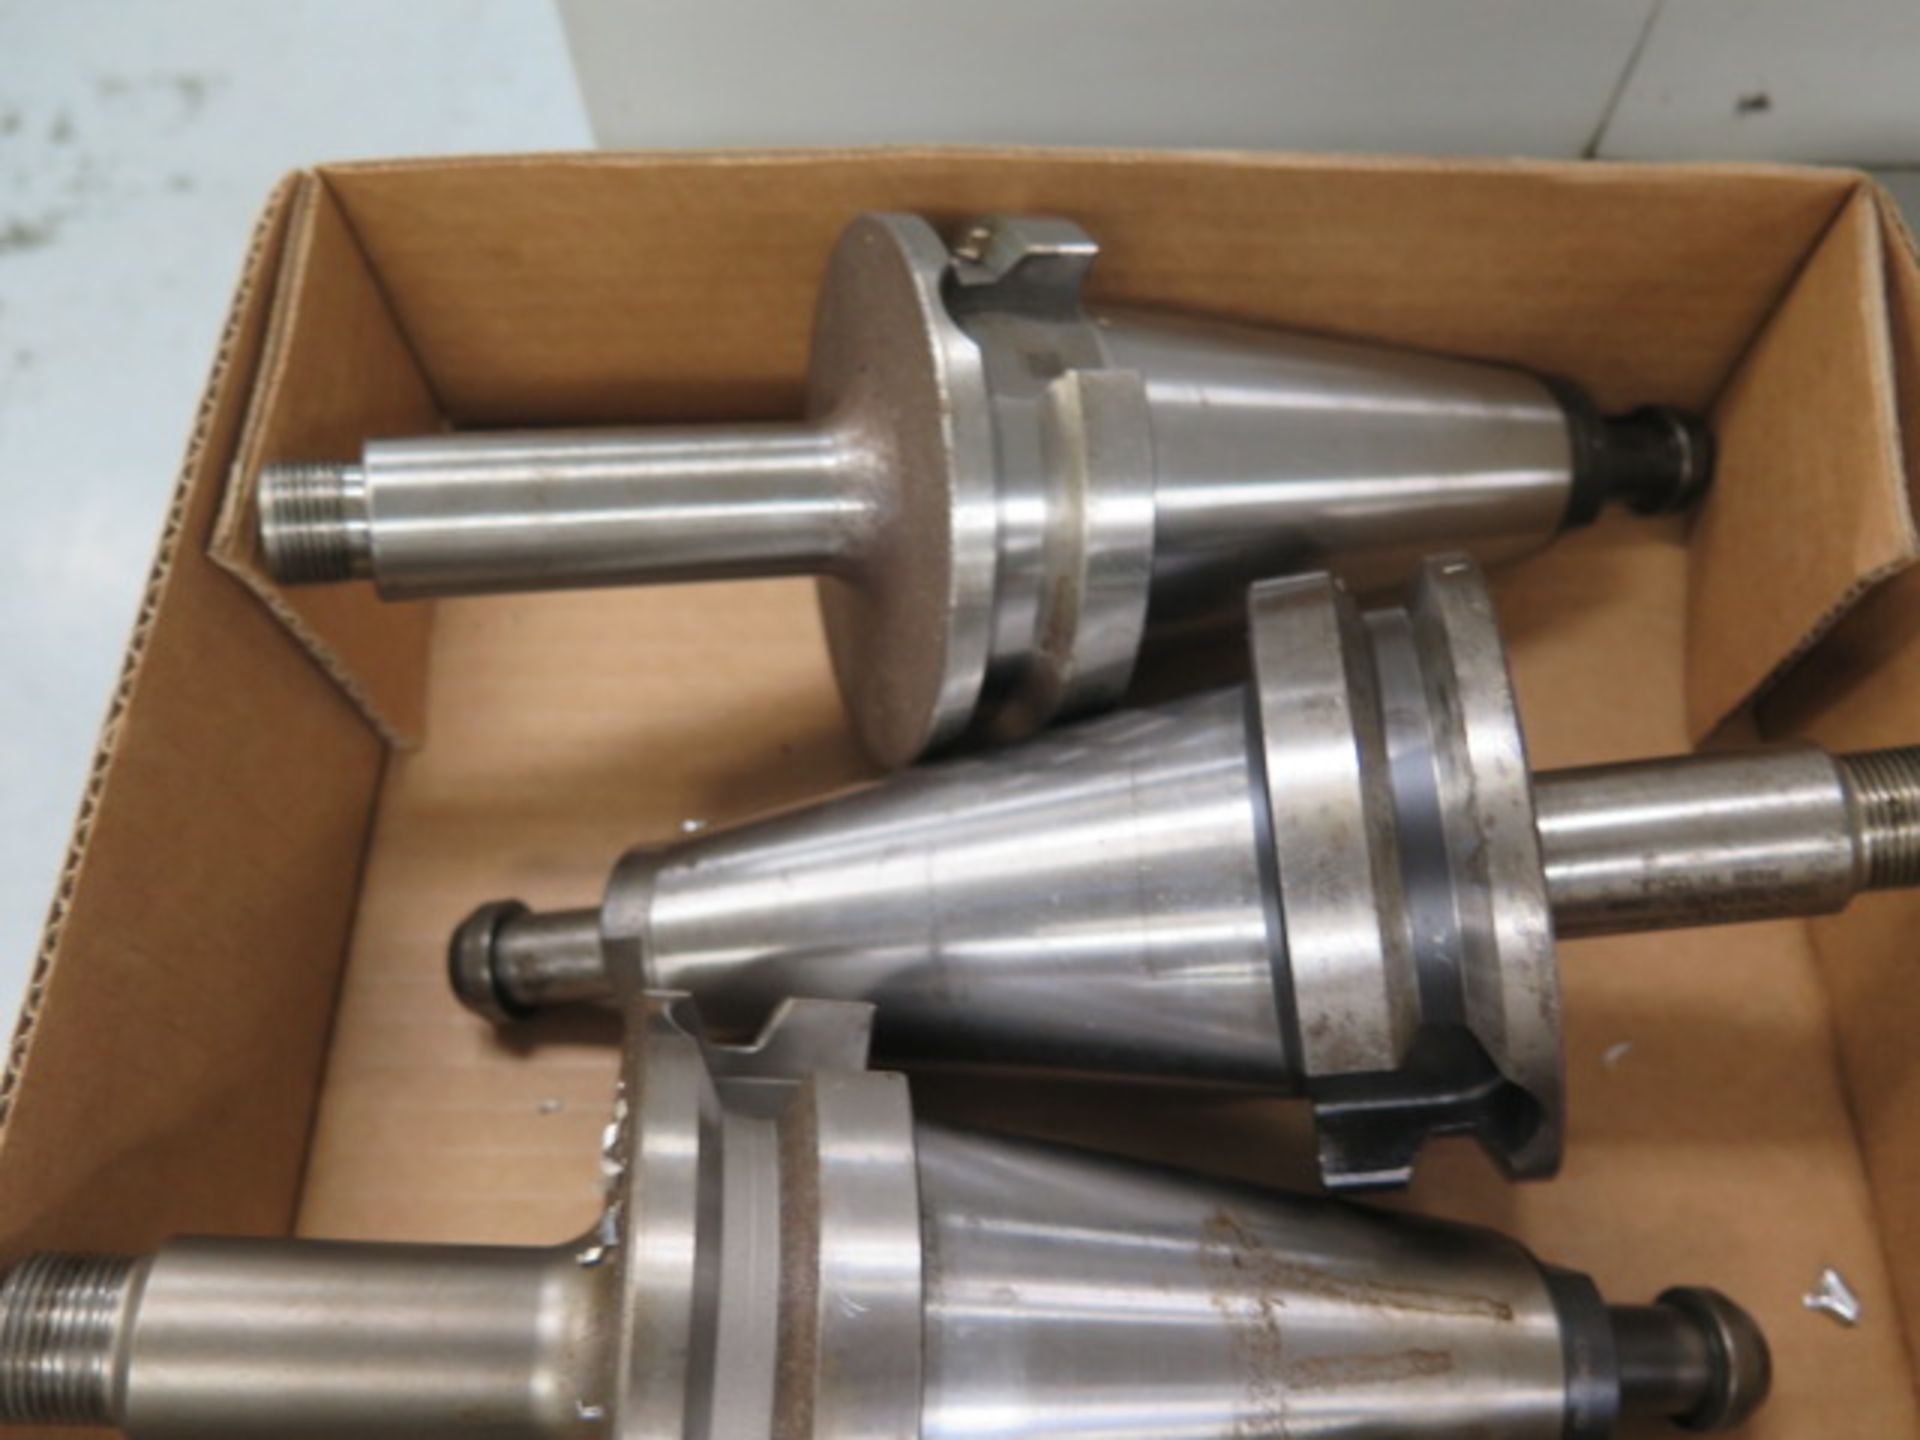 BT-50 Taper ER16 Collet chucks (5) (SOLD AS-IS - NO WARRANTY) (Located @ 2229 Ringwood Ave. San Jose - Image 3 of 6